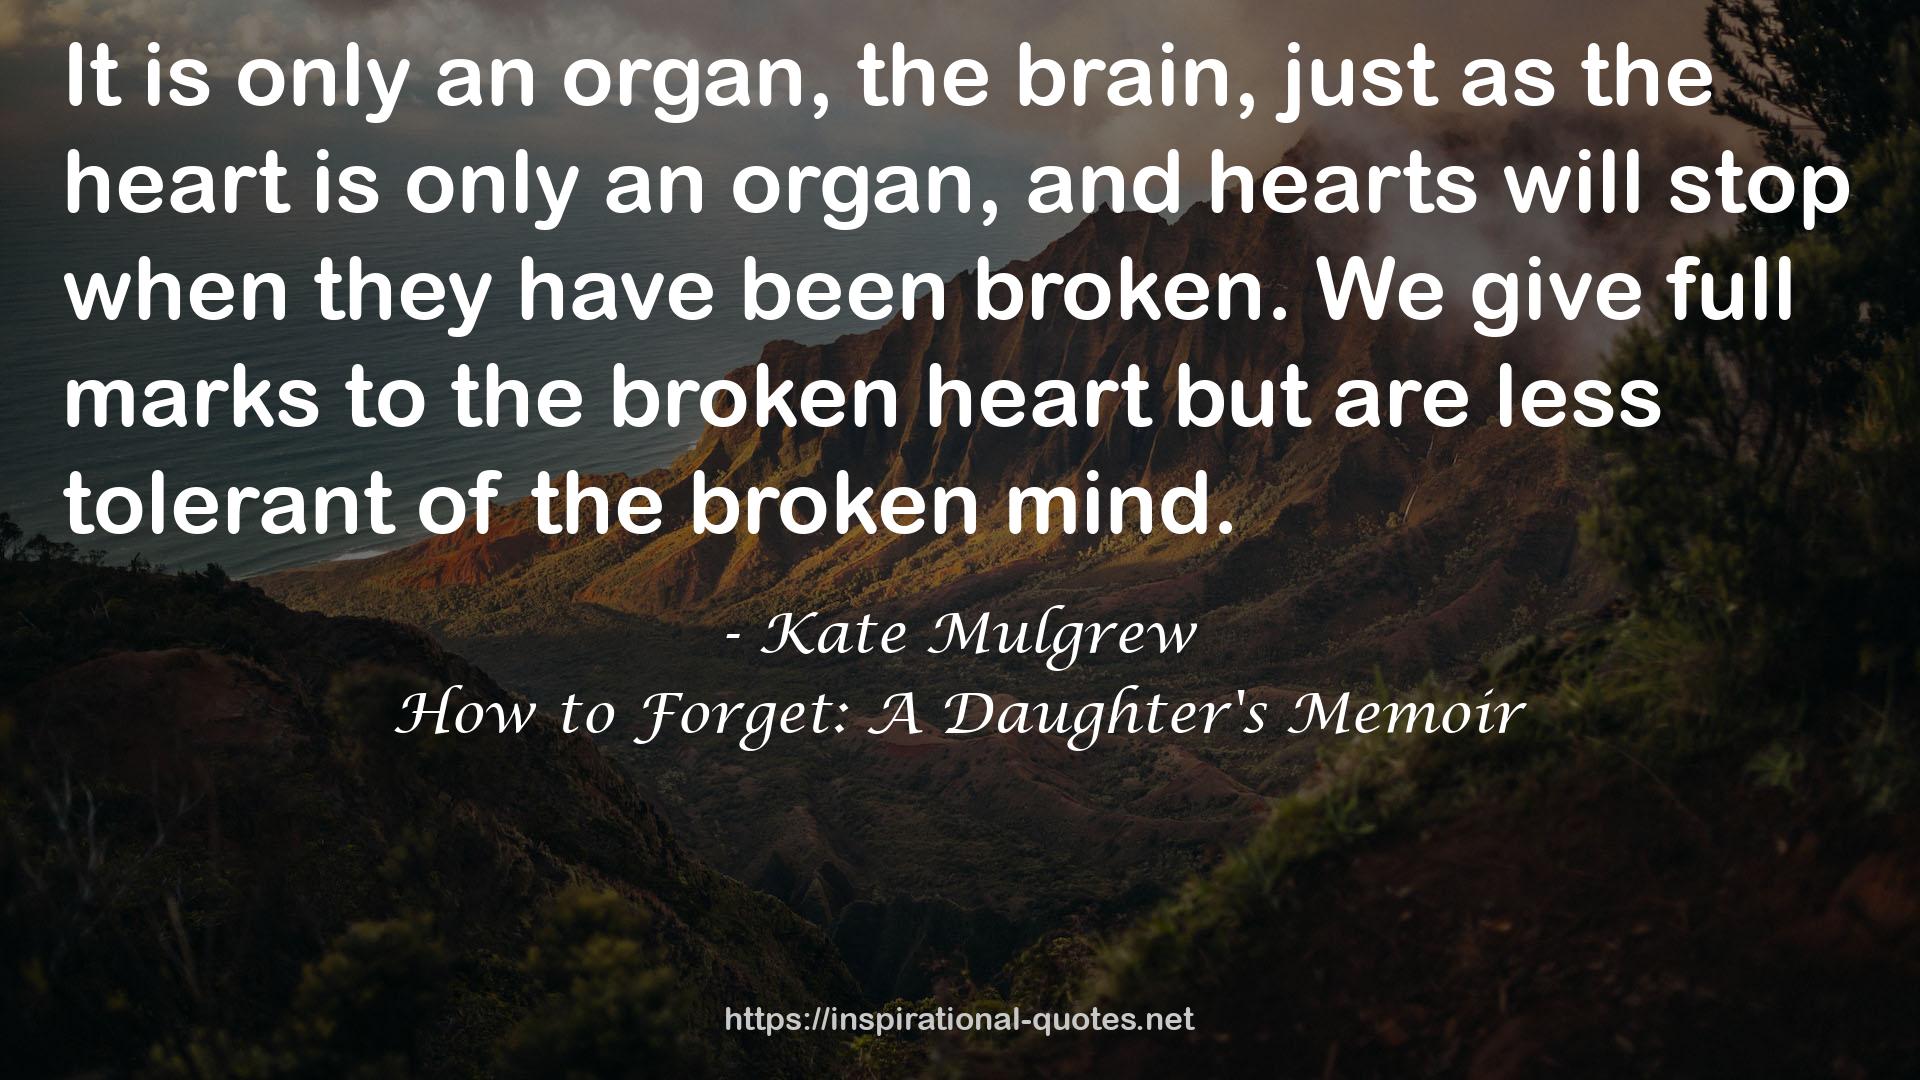 How to Forget: A Daughter's Memoir QUOTES